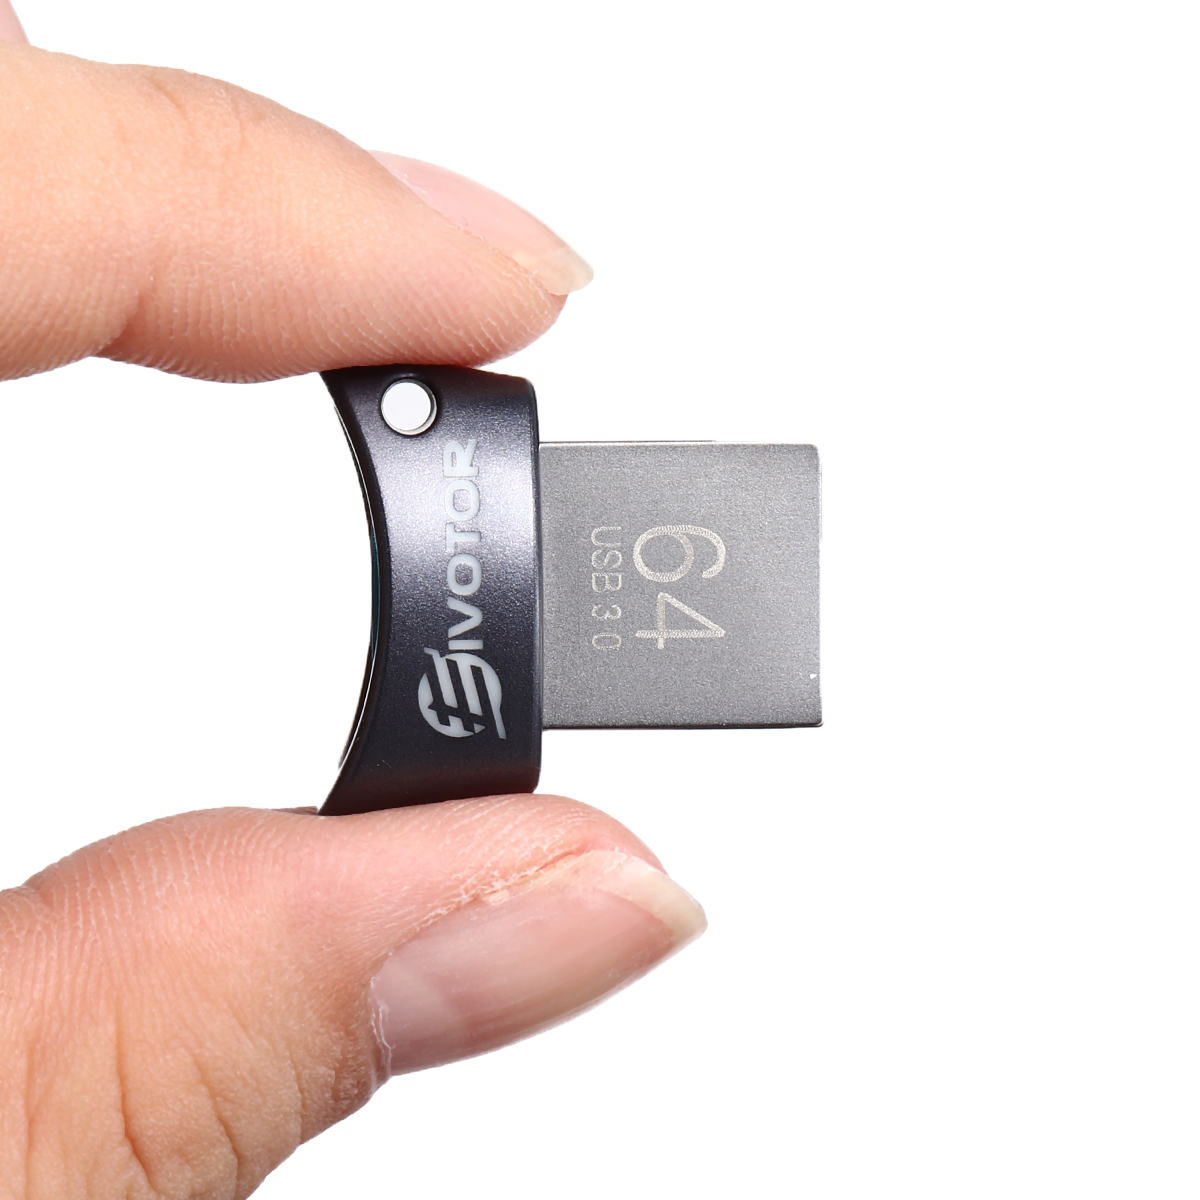 Find EIVOTOR USB3 0 Flash Drives Waterproof 64G Mini Lighting Pen Drive Memory U Disk for Sale on Gipsybee.com with cryptocurrencies